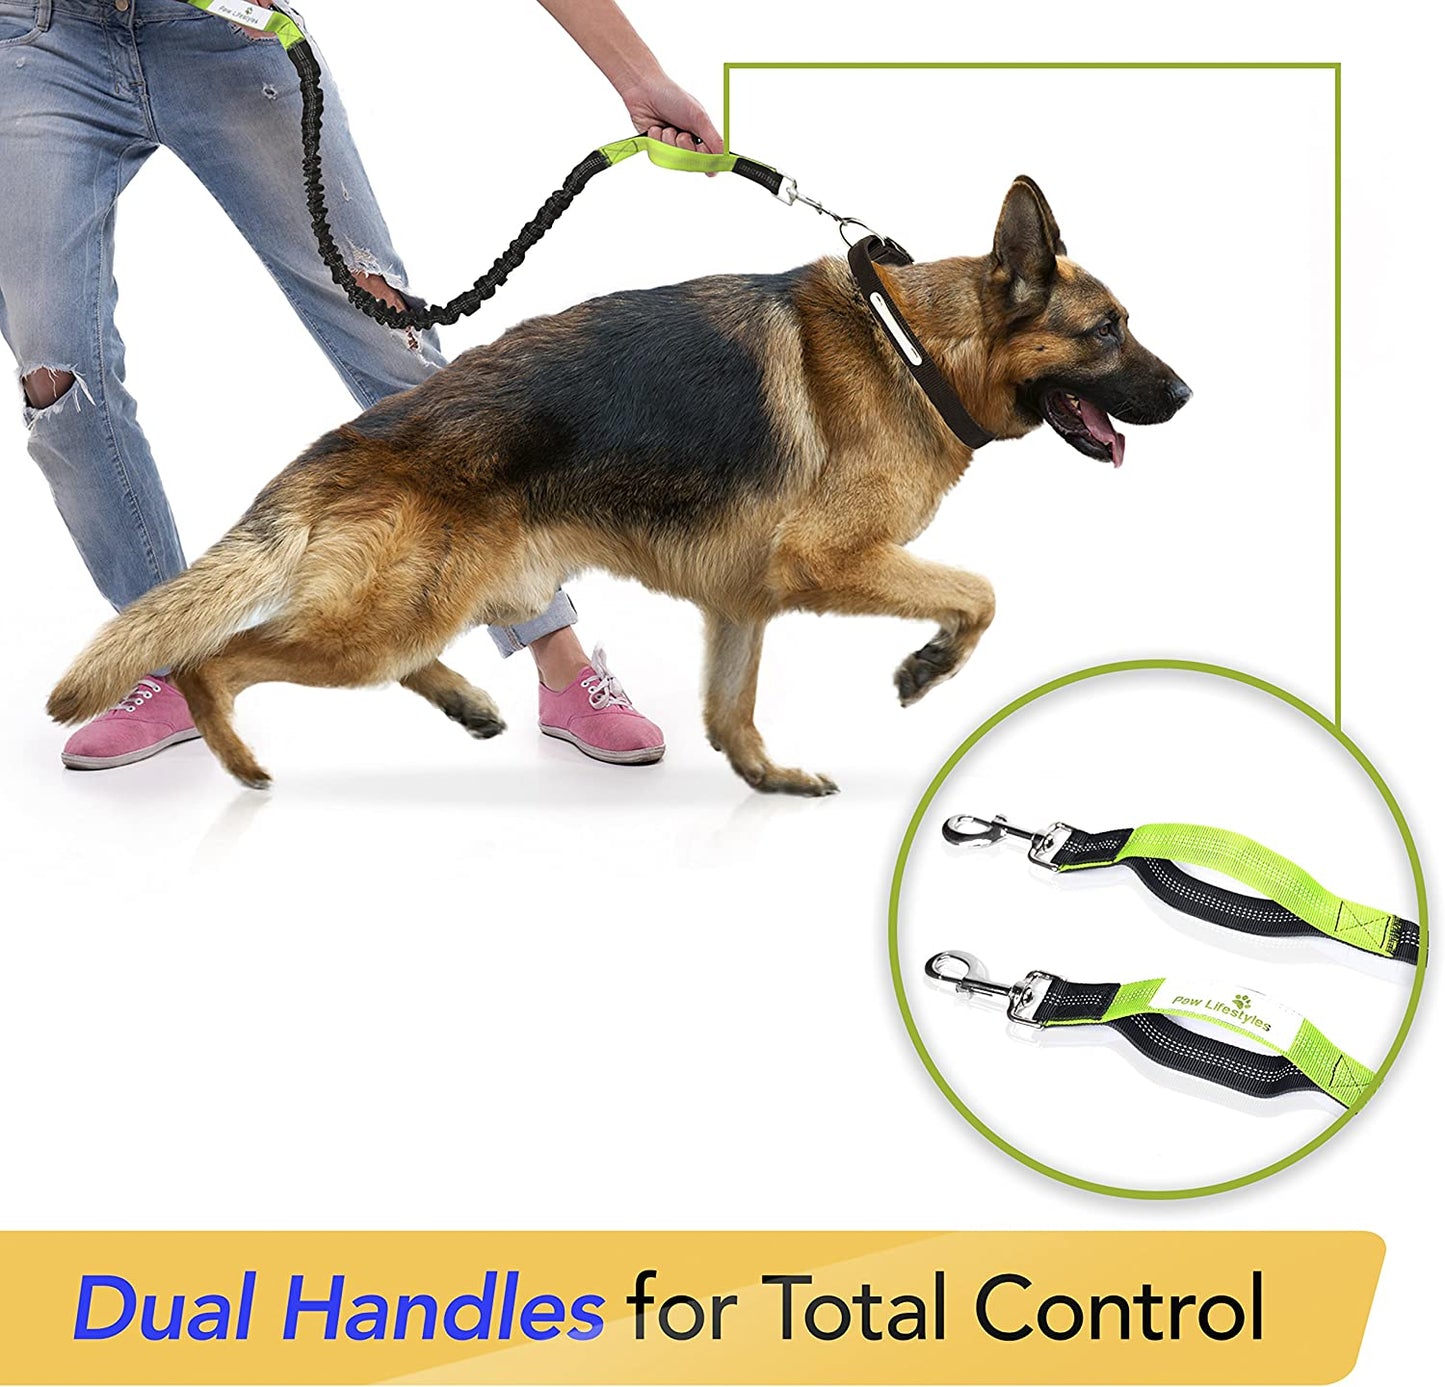 Retractable Hands Free Dog Leash W/Smartphone Pouch – Dual Handle Bungee Waist Leash for up to 150 Lbs Large Dogs